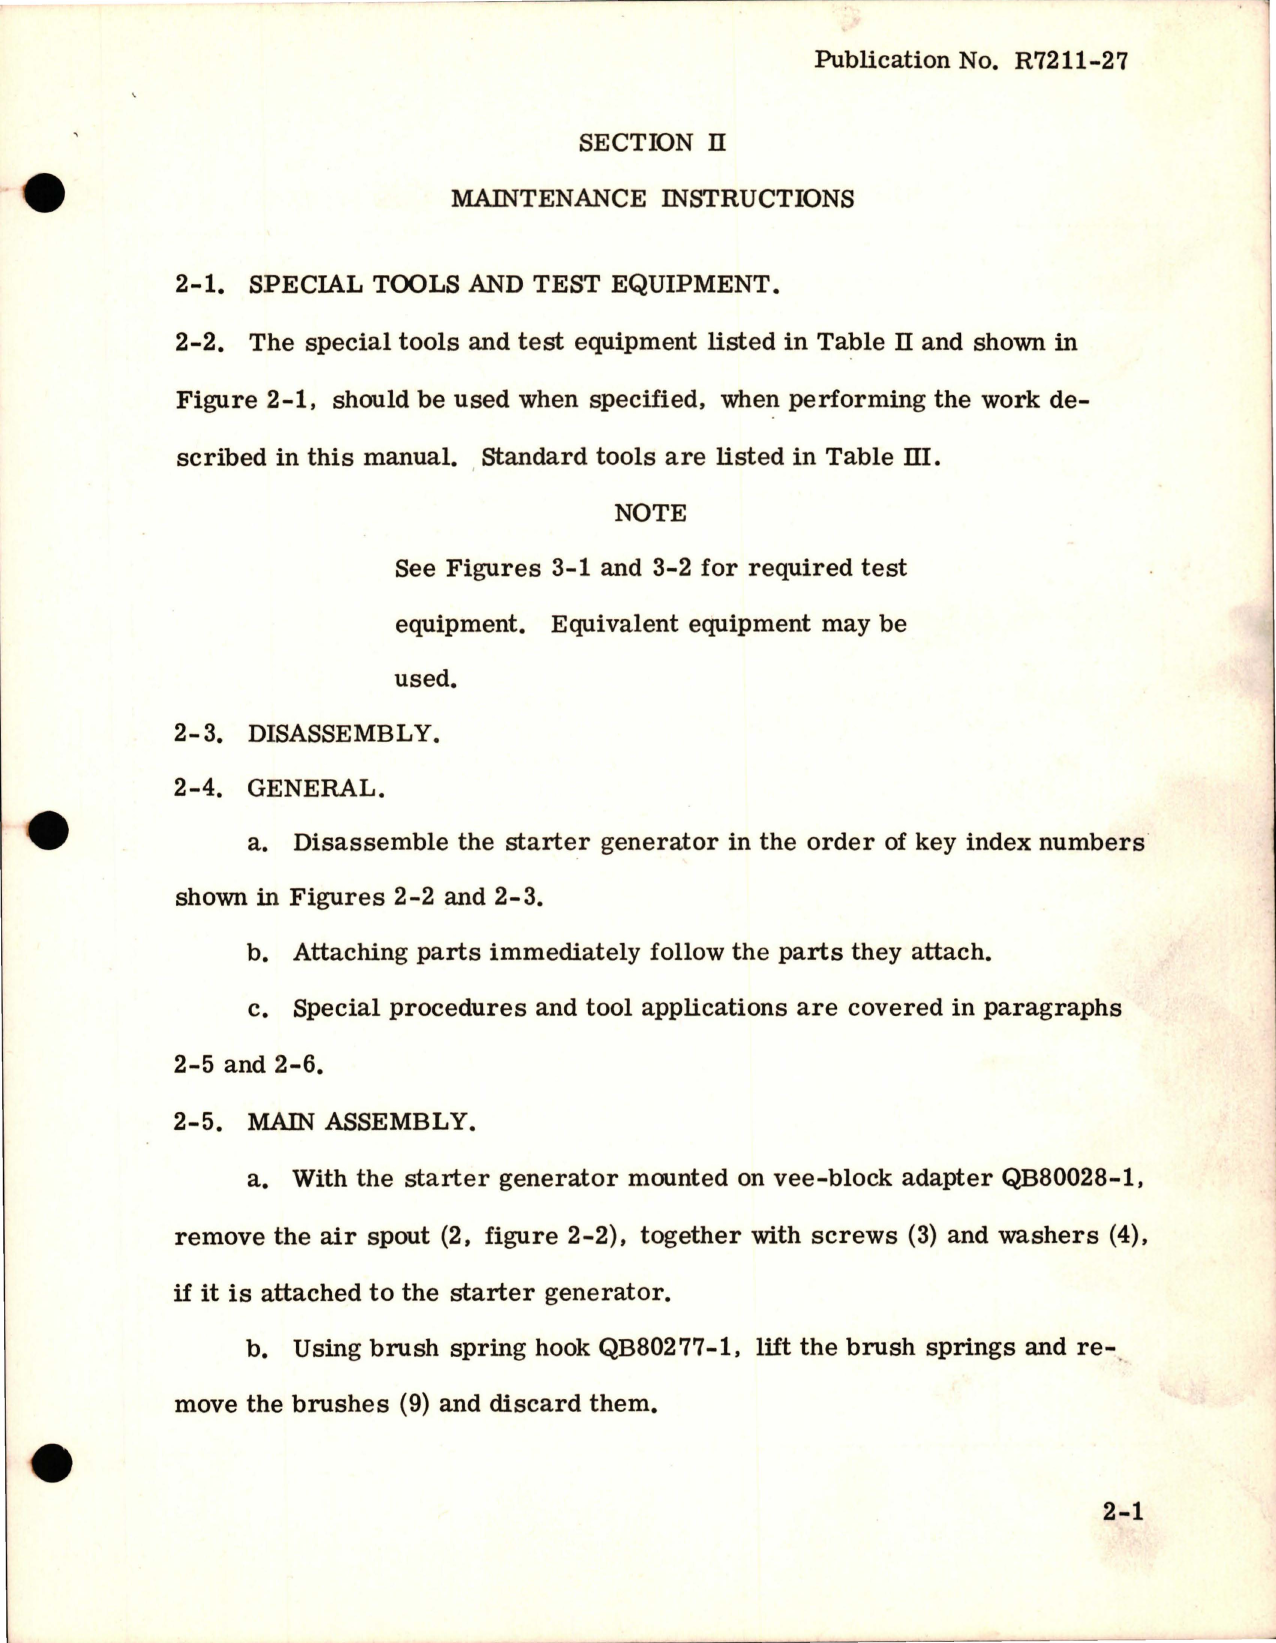 Sample page 9 from AirCorps Library document: Maintenance Instructions for Starter Generator - Type 30E20-11-B 